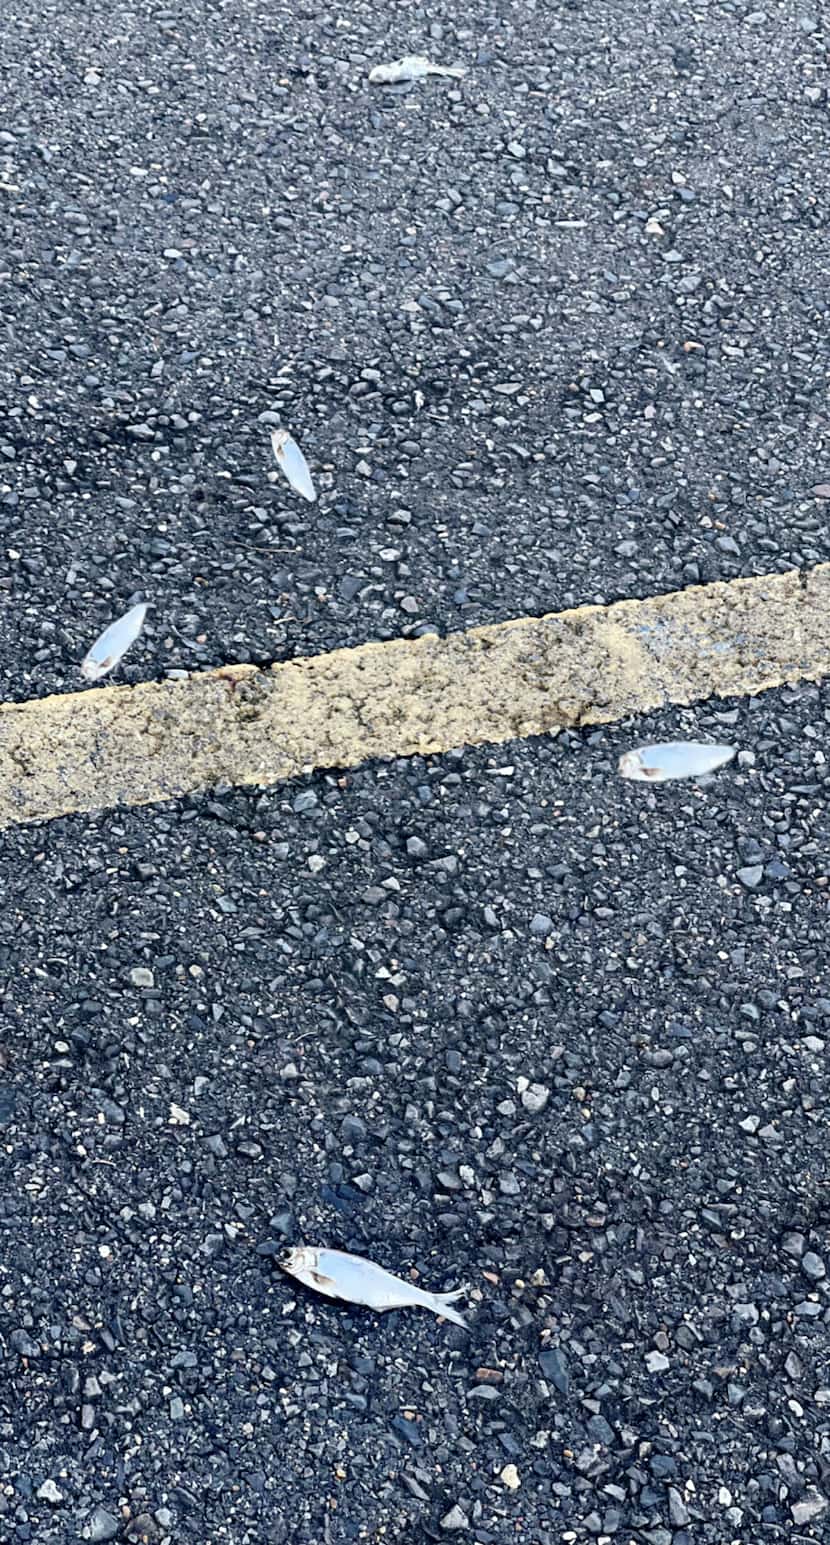 Fish fell from the sky in Texarkana during a storm in December. 